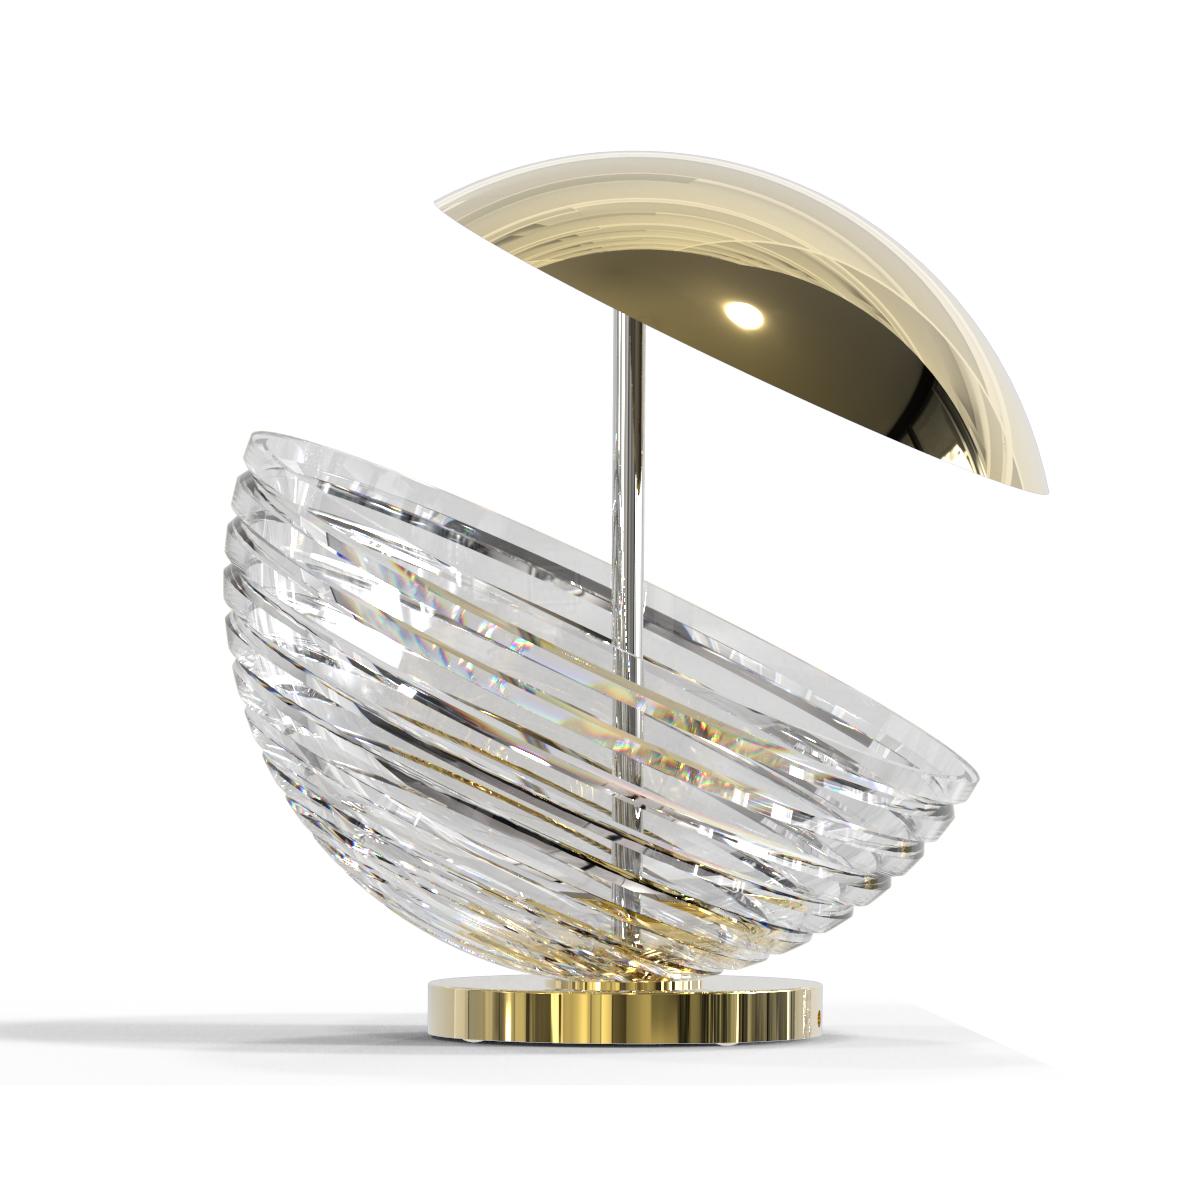 Ballance your life with decorative table lamp Ballu. 
Glowing beneath the transparent crust of purest crystal,
the light is refracted through cut lines, to cast a stunning light.

Ballu table lamp is handmade of one hemisphere of the purest,